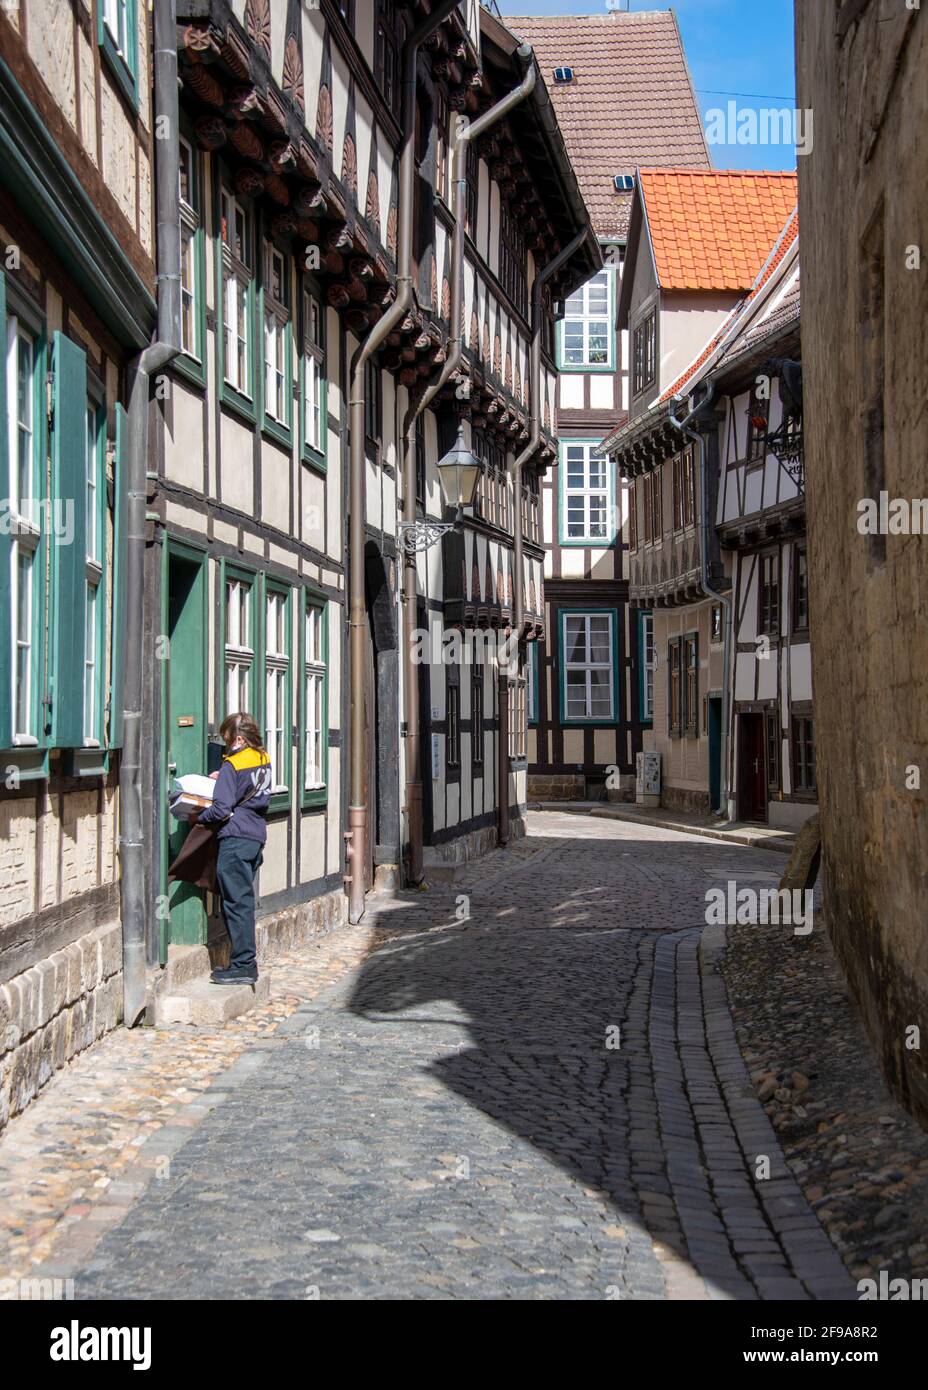 Germany, Saxony-Anhalt, Quedlinburg, narrow alley with half-timbered houses, postal worker carries letters from, World Heritage City of Quedlinburg. Stock Photo